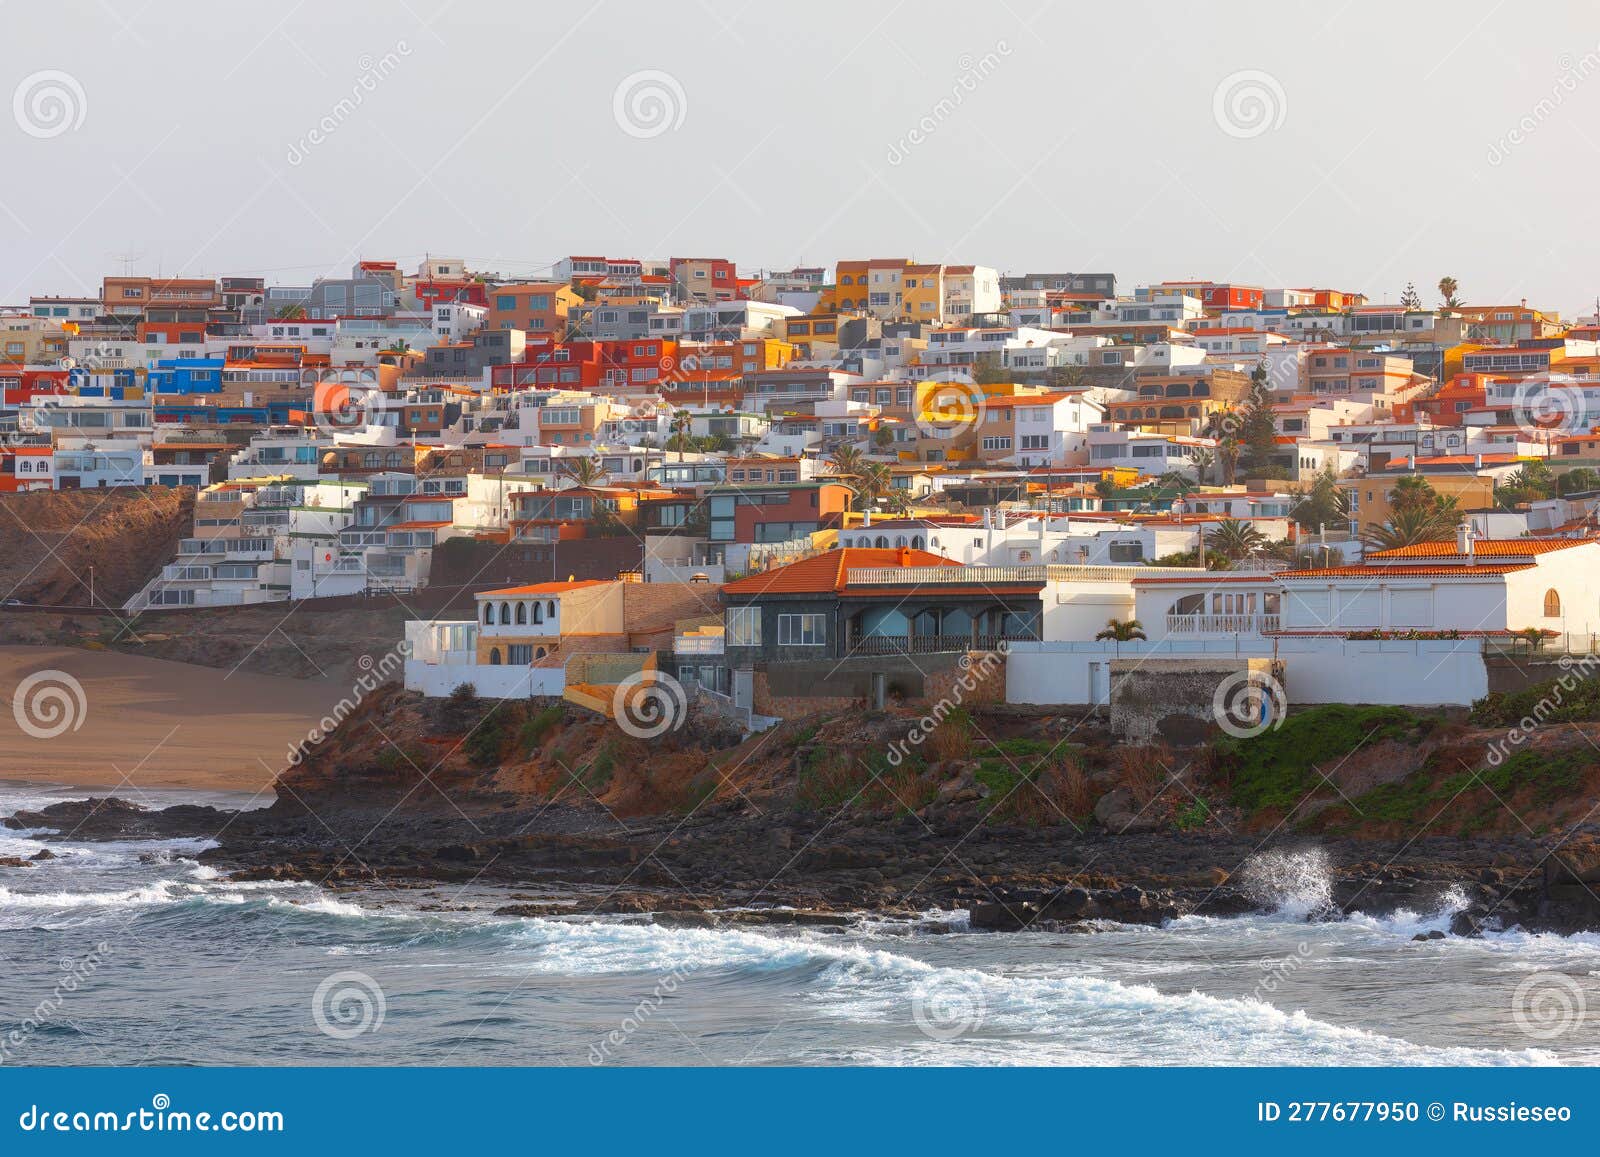 houses situated at atlantic coast